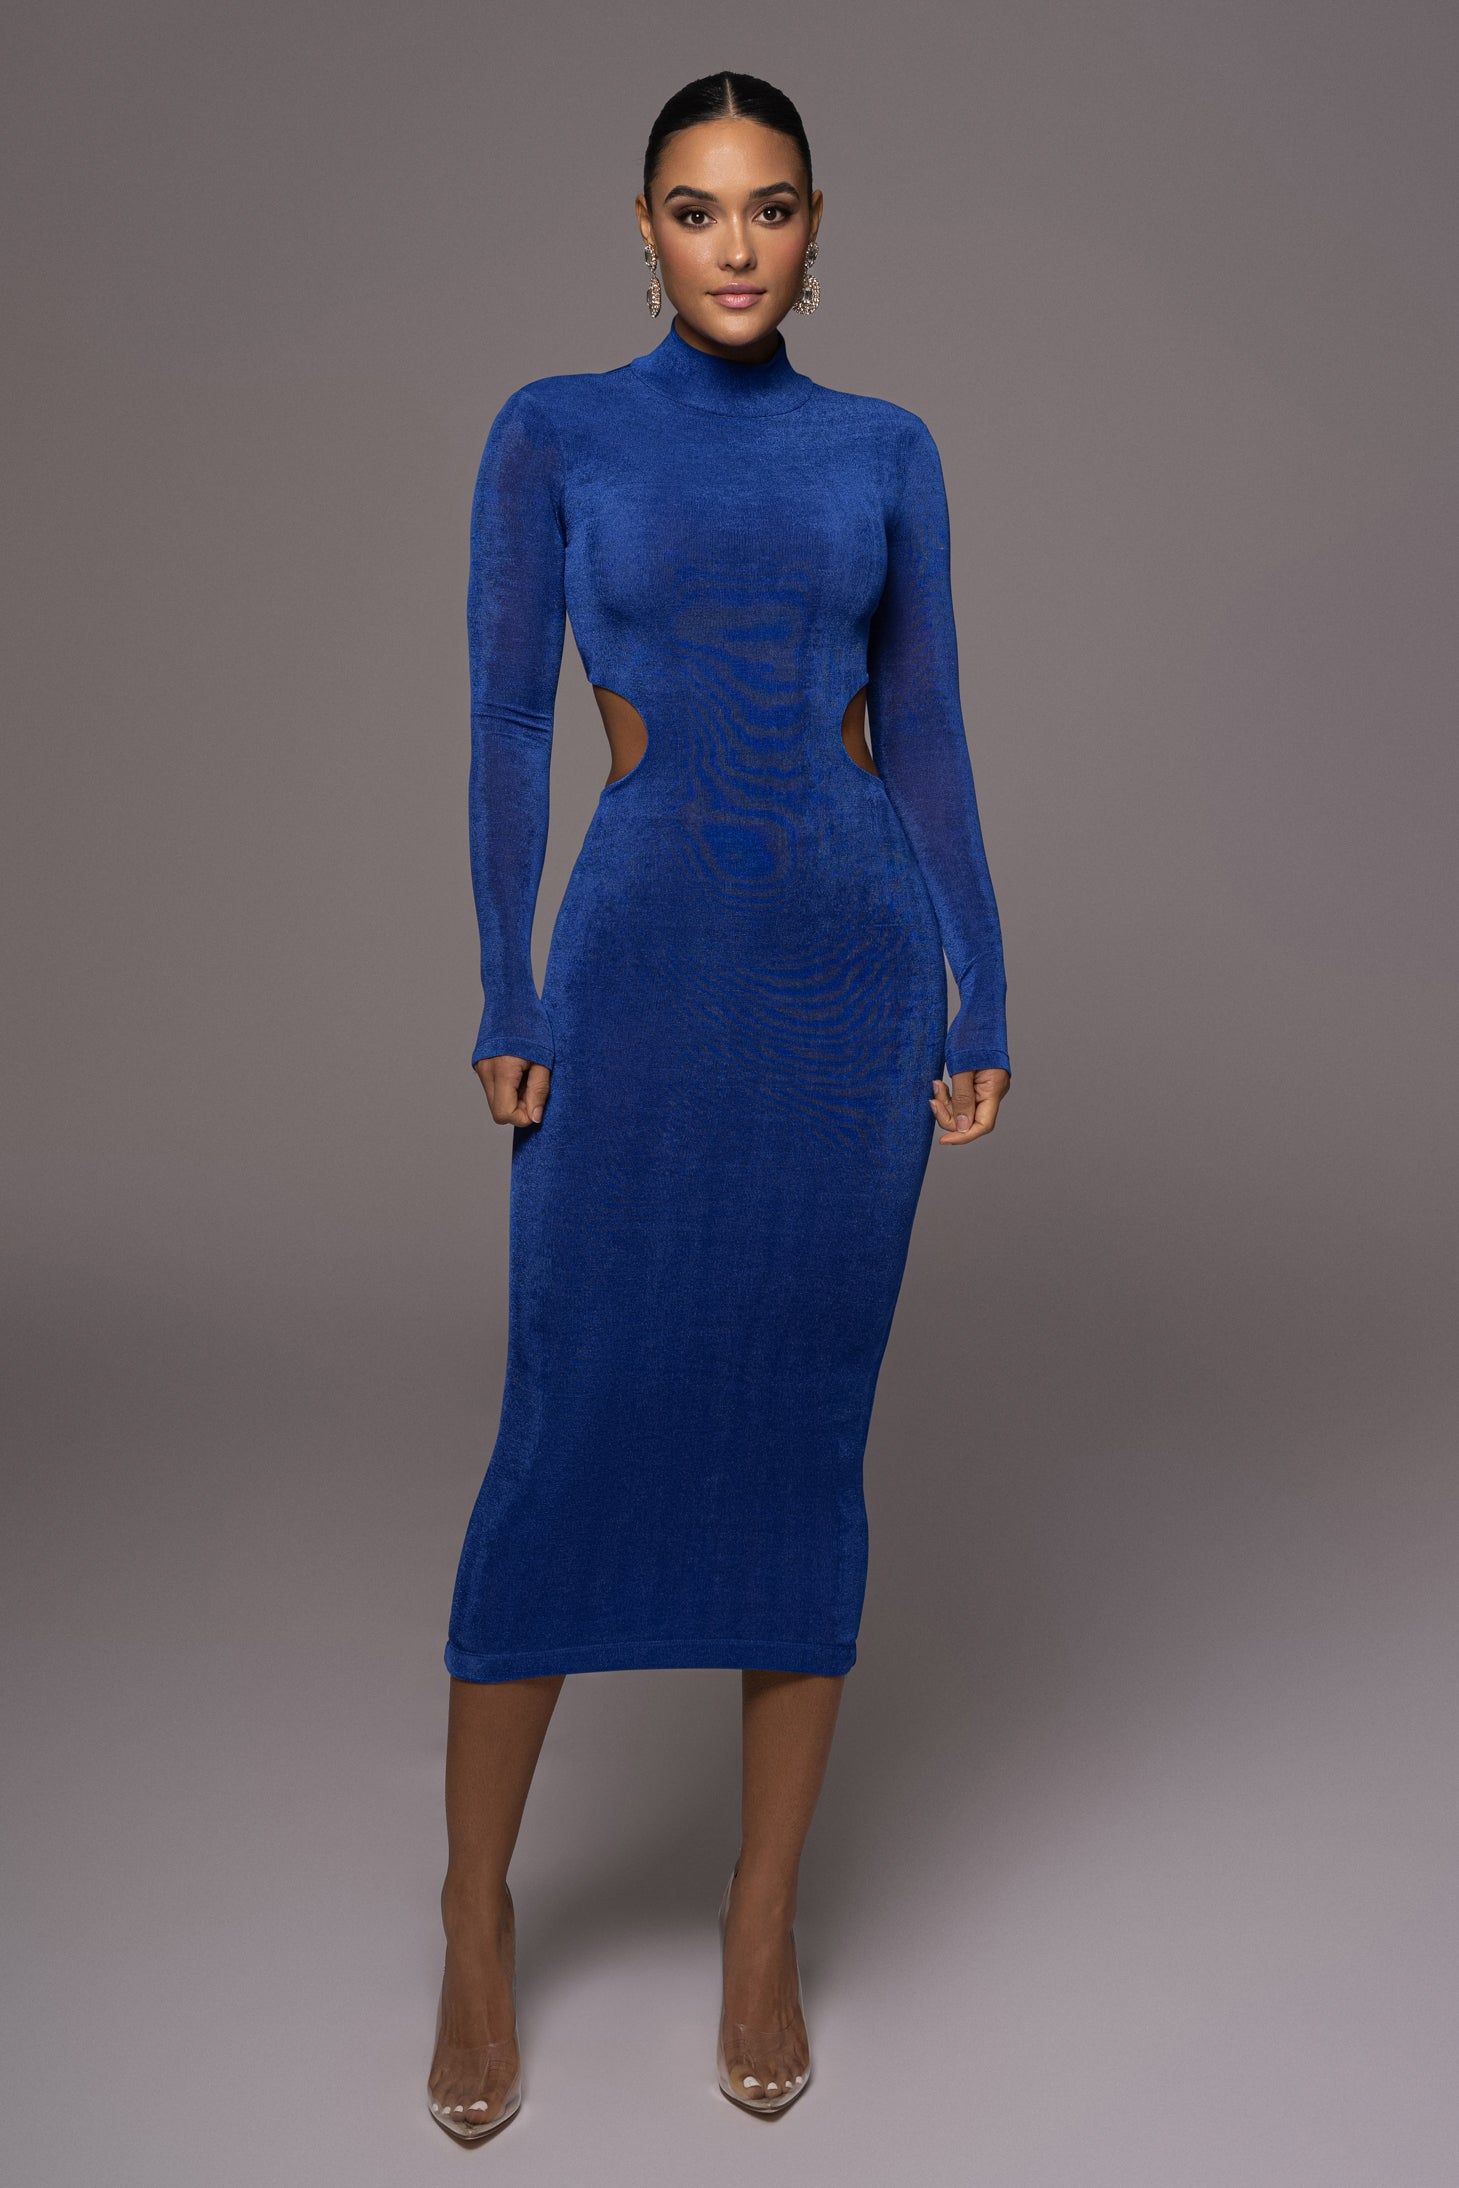 Royal Blue Long Dress Outfit
  Ideas for Women